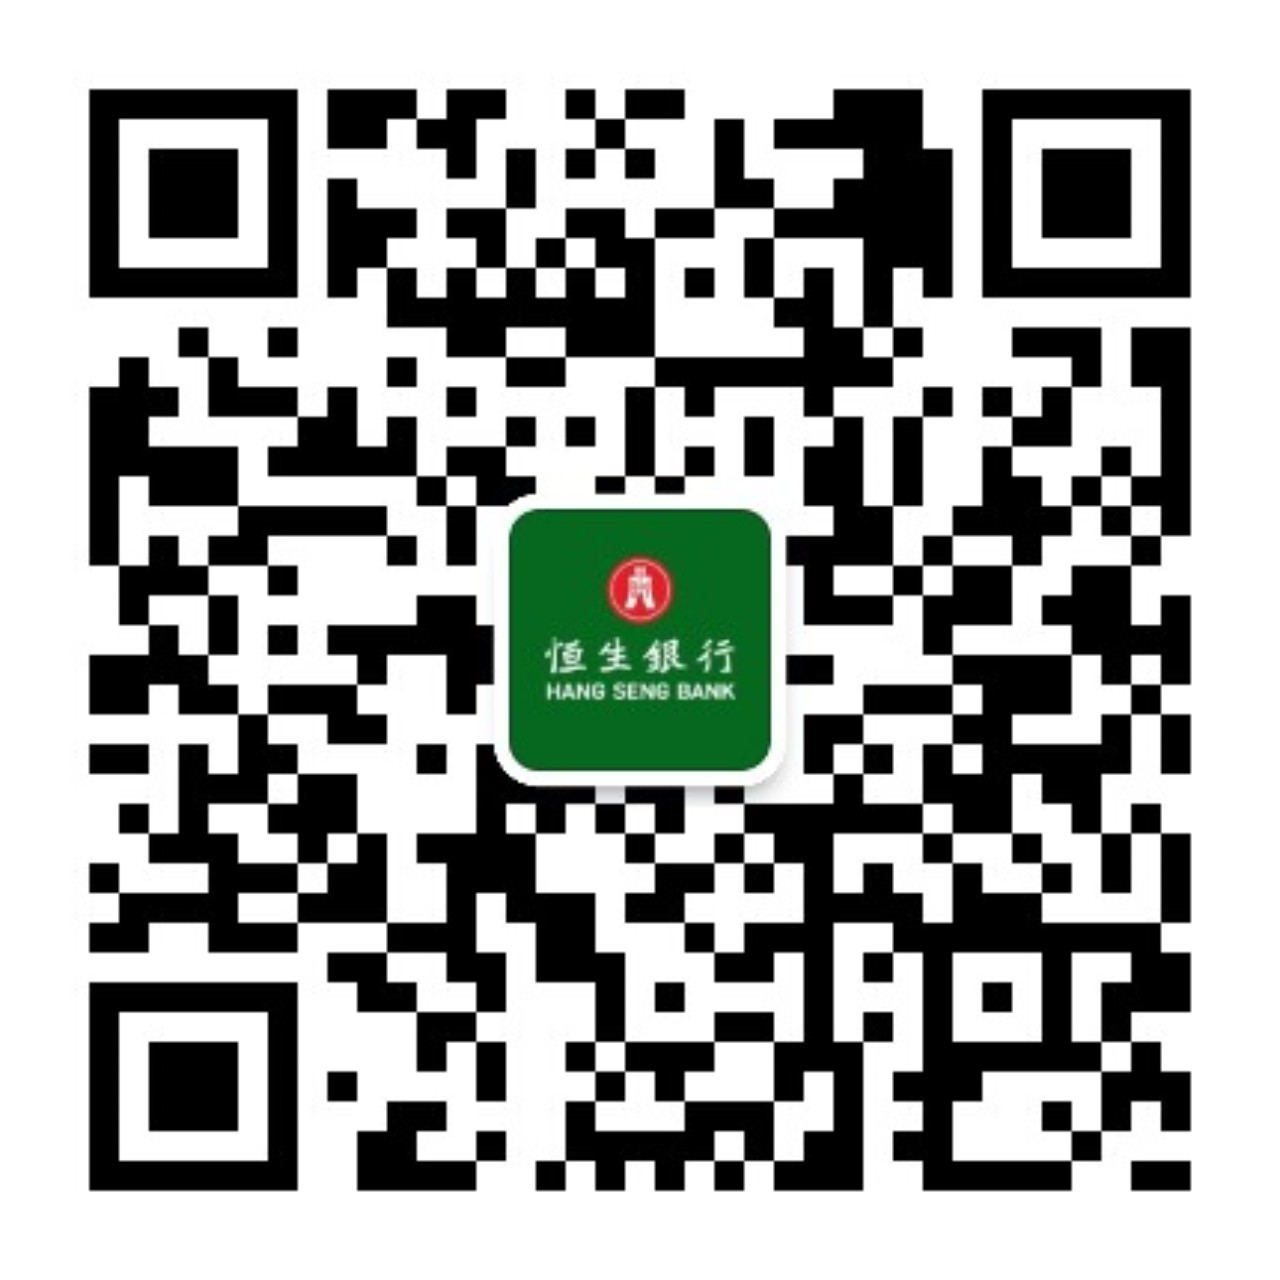 Find us by searching HangSengHKCMB 或 恒生香港商業理財  or by scanning our QR code within the WeChat app.